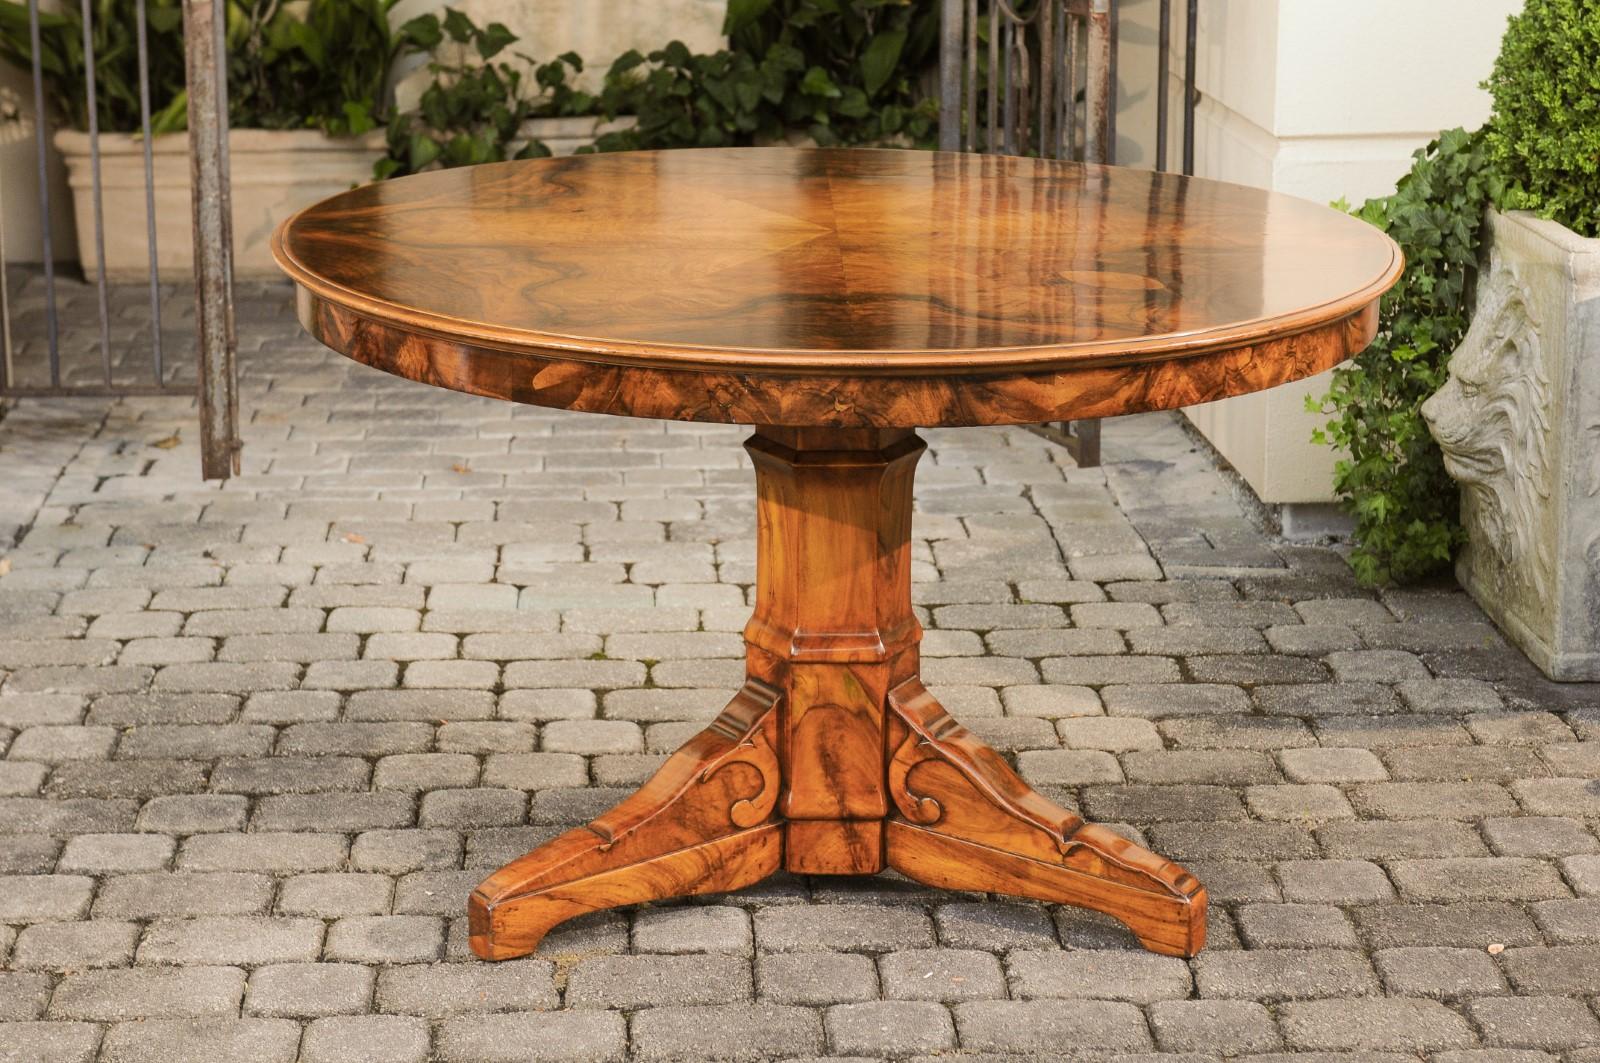 An Austrian Gründerzeit period walnut round top dining table from the late 19th century with radiating veneer and pedestal base. Born in Austria during the second quarter of the 19th century, this dining table features a stunning top adorned with